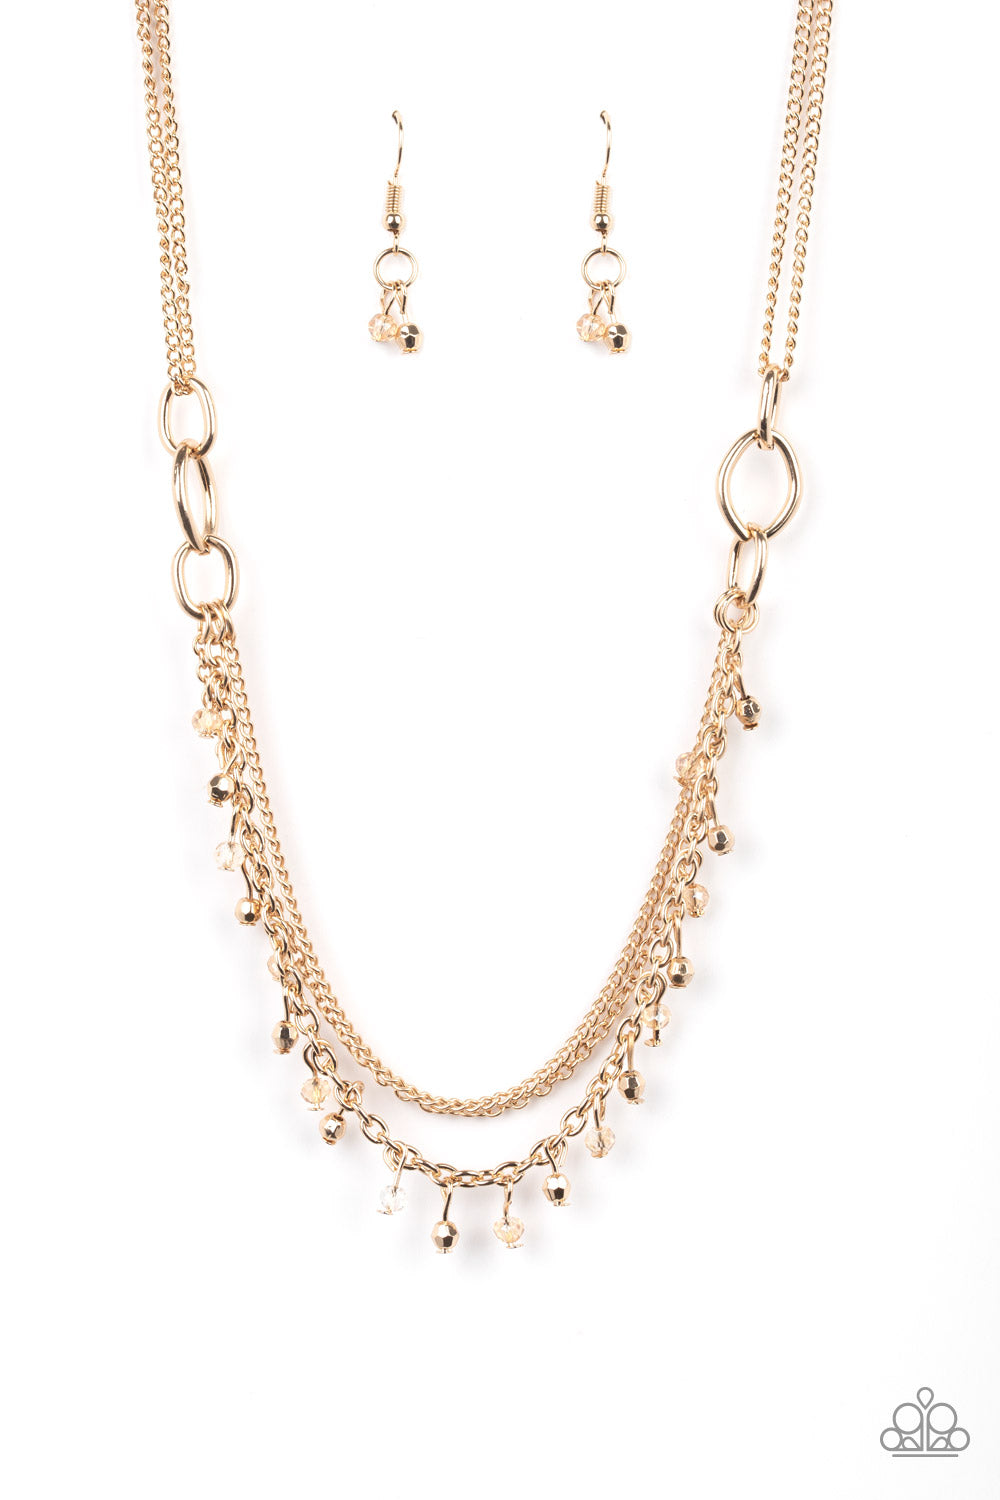 Financially Fabulous - Gold Necklace